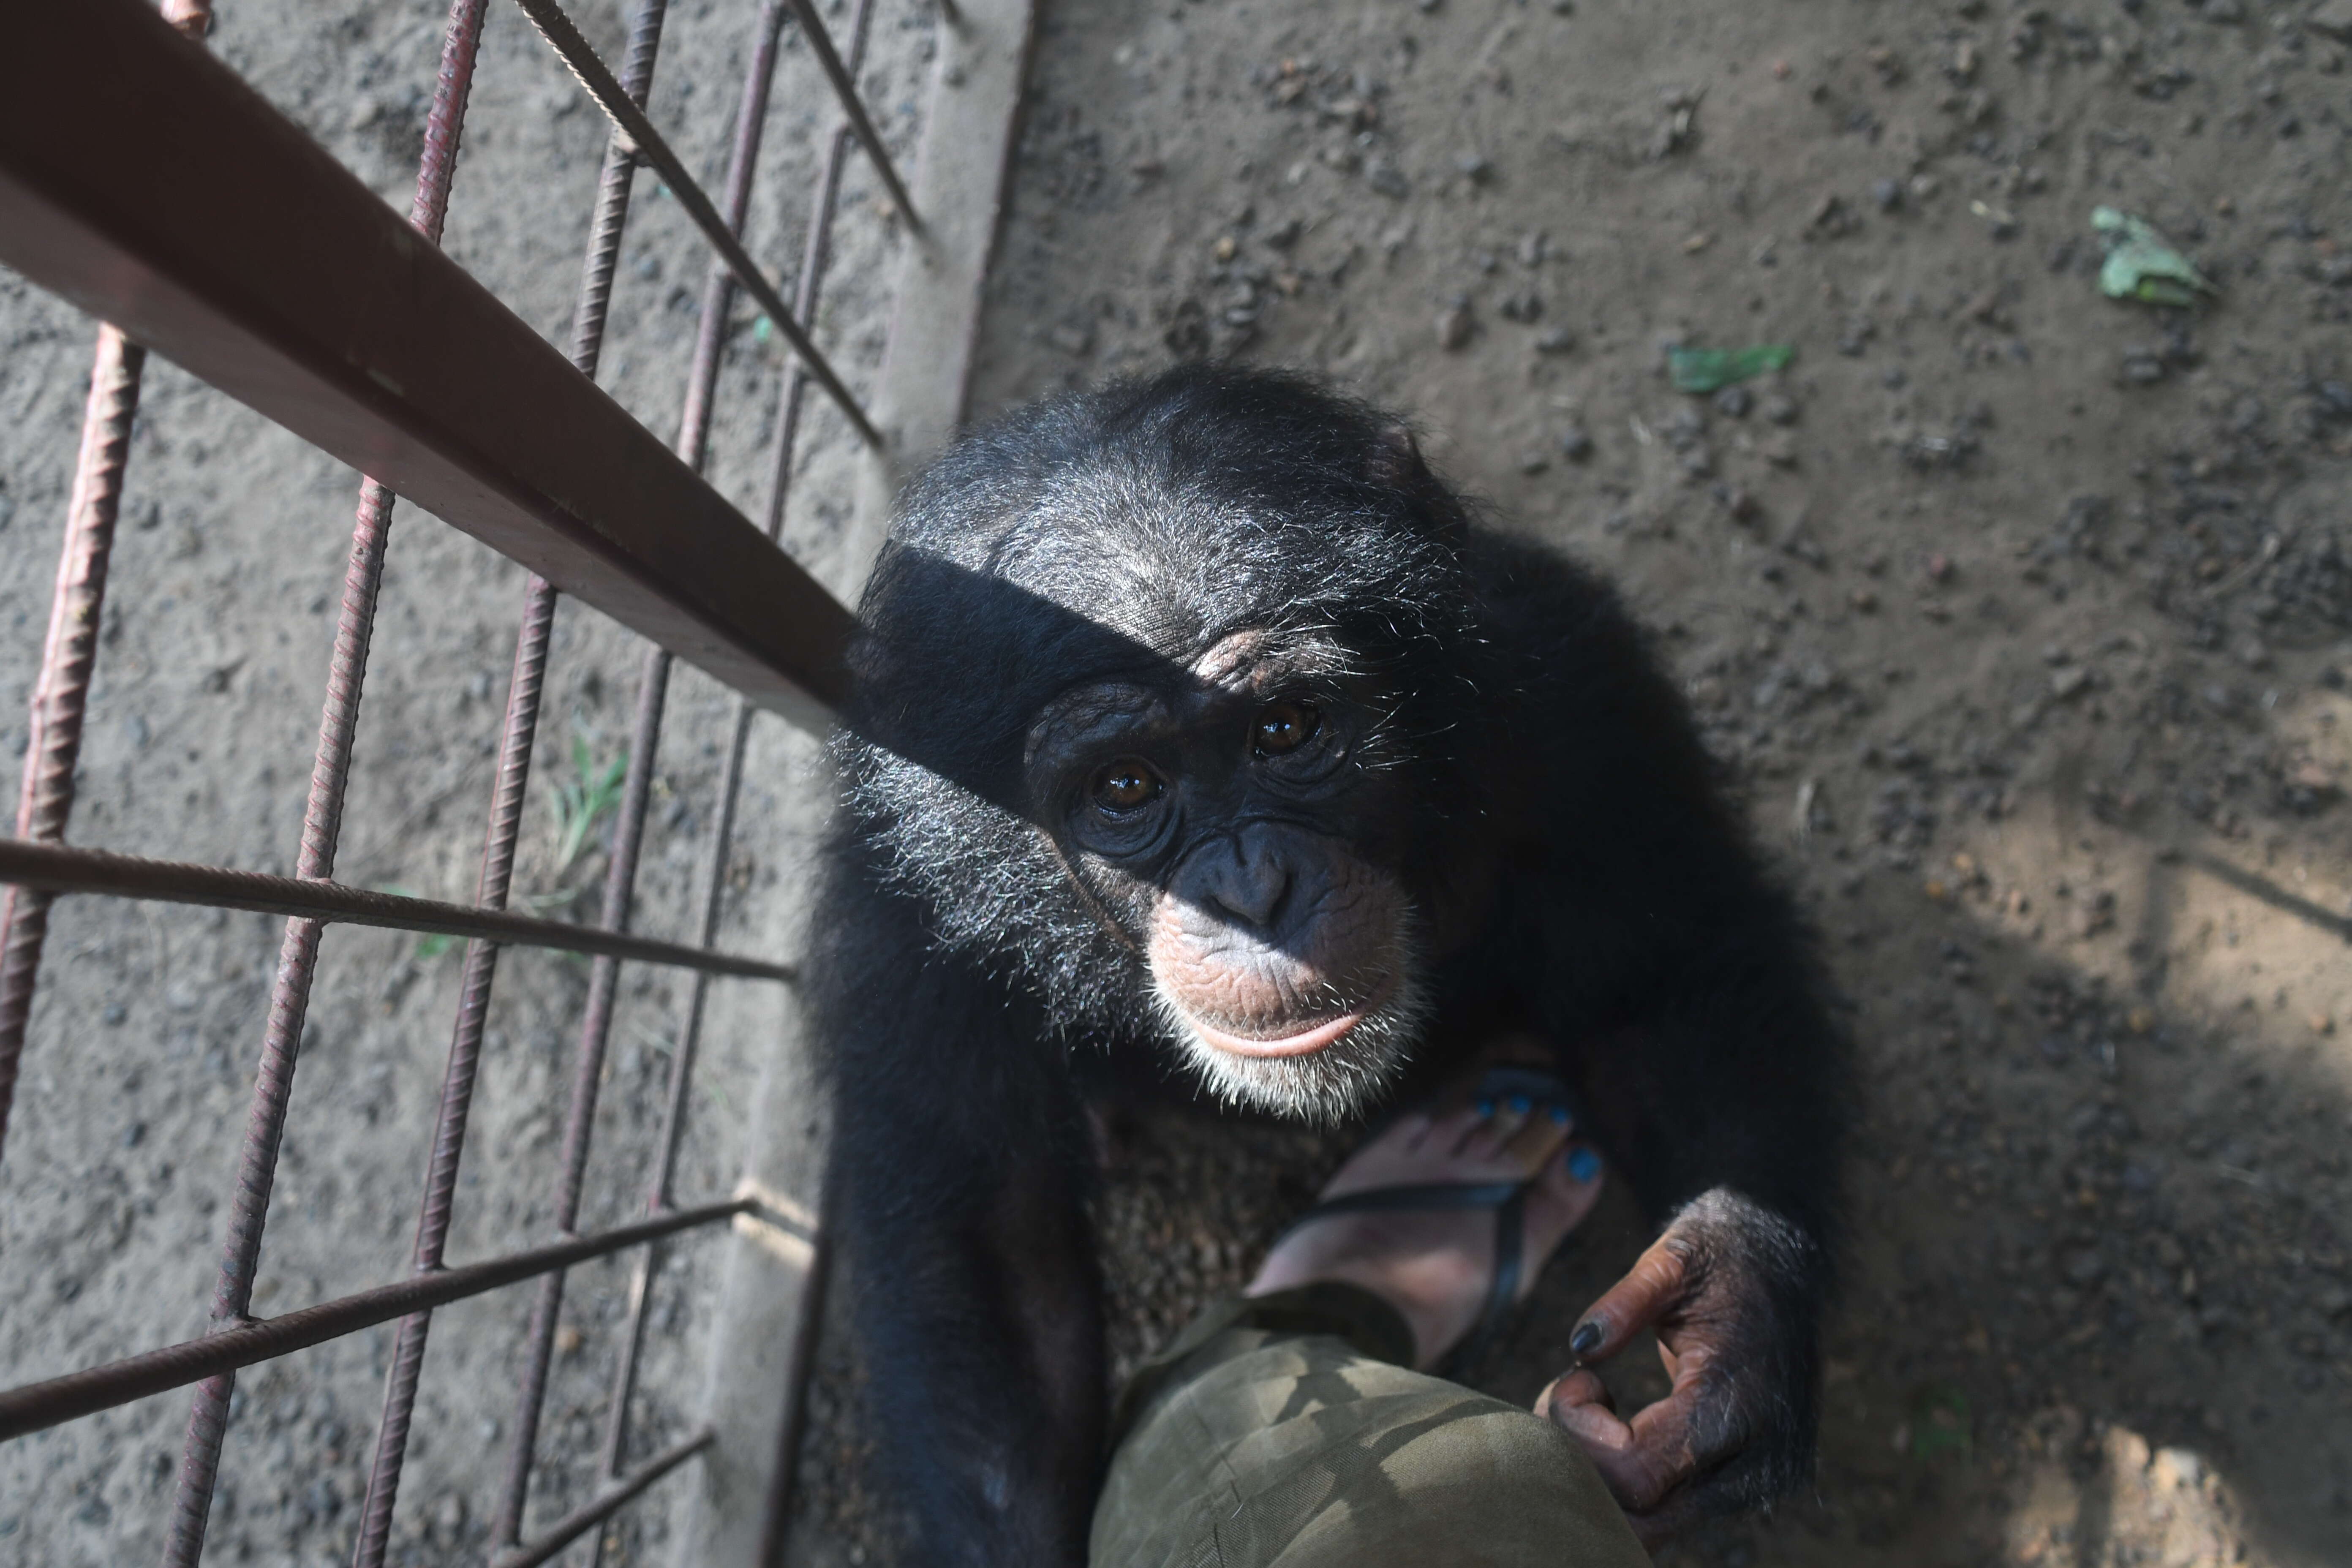 Rescued baby chimp in Liberia